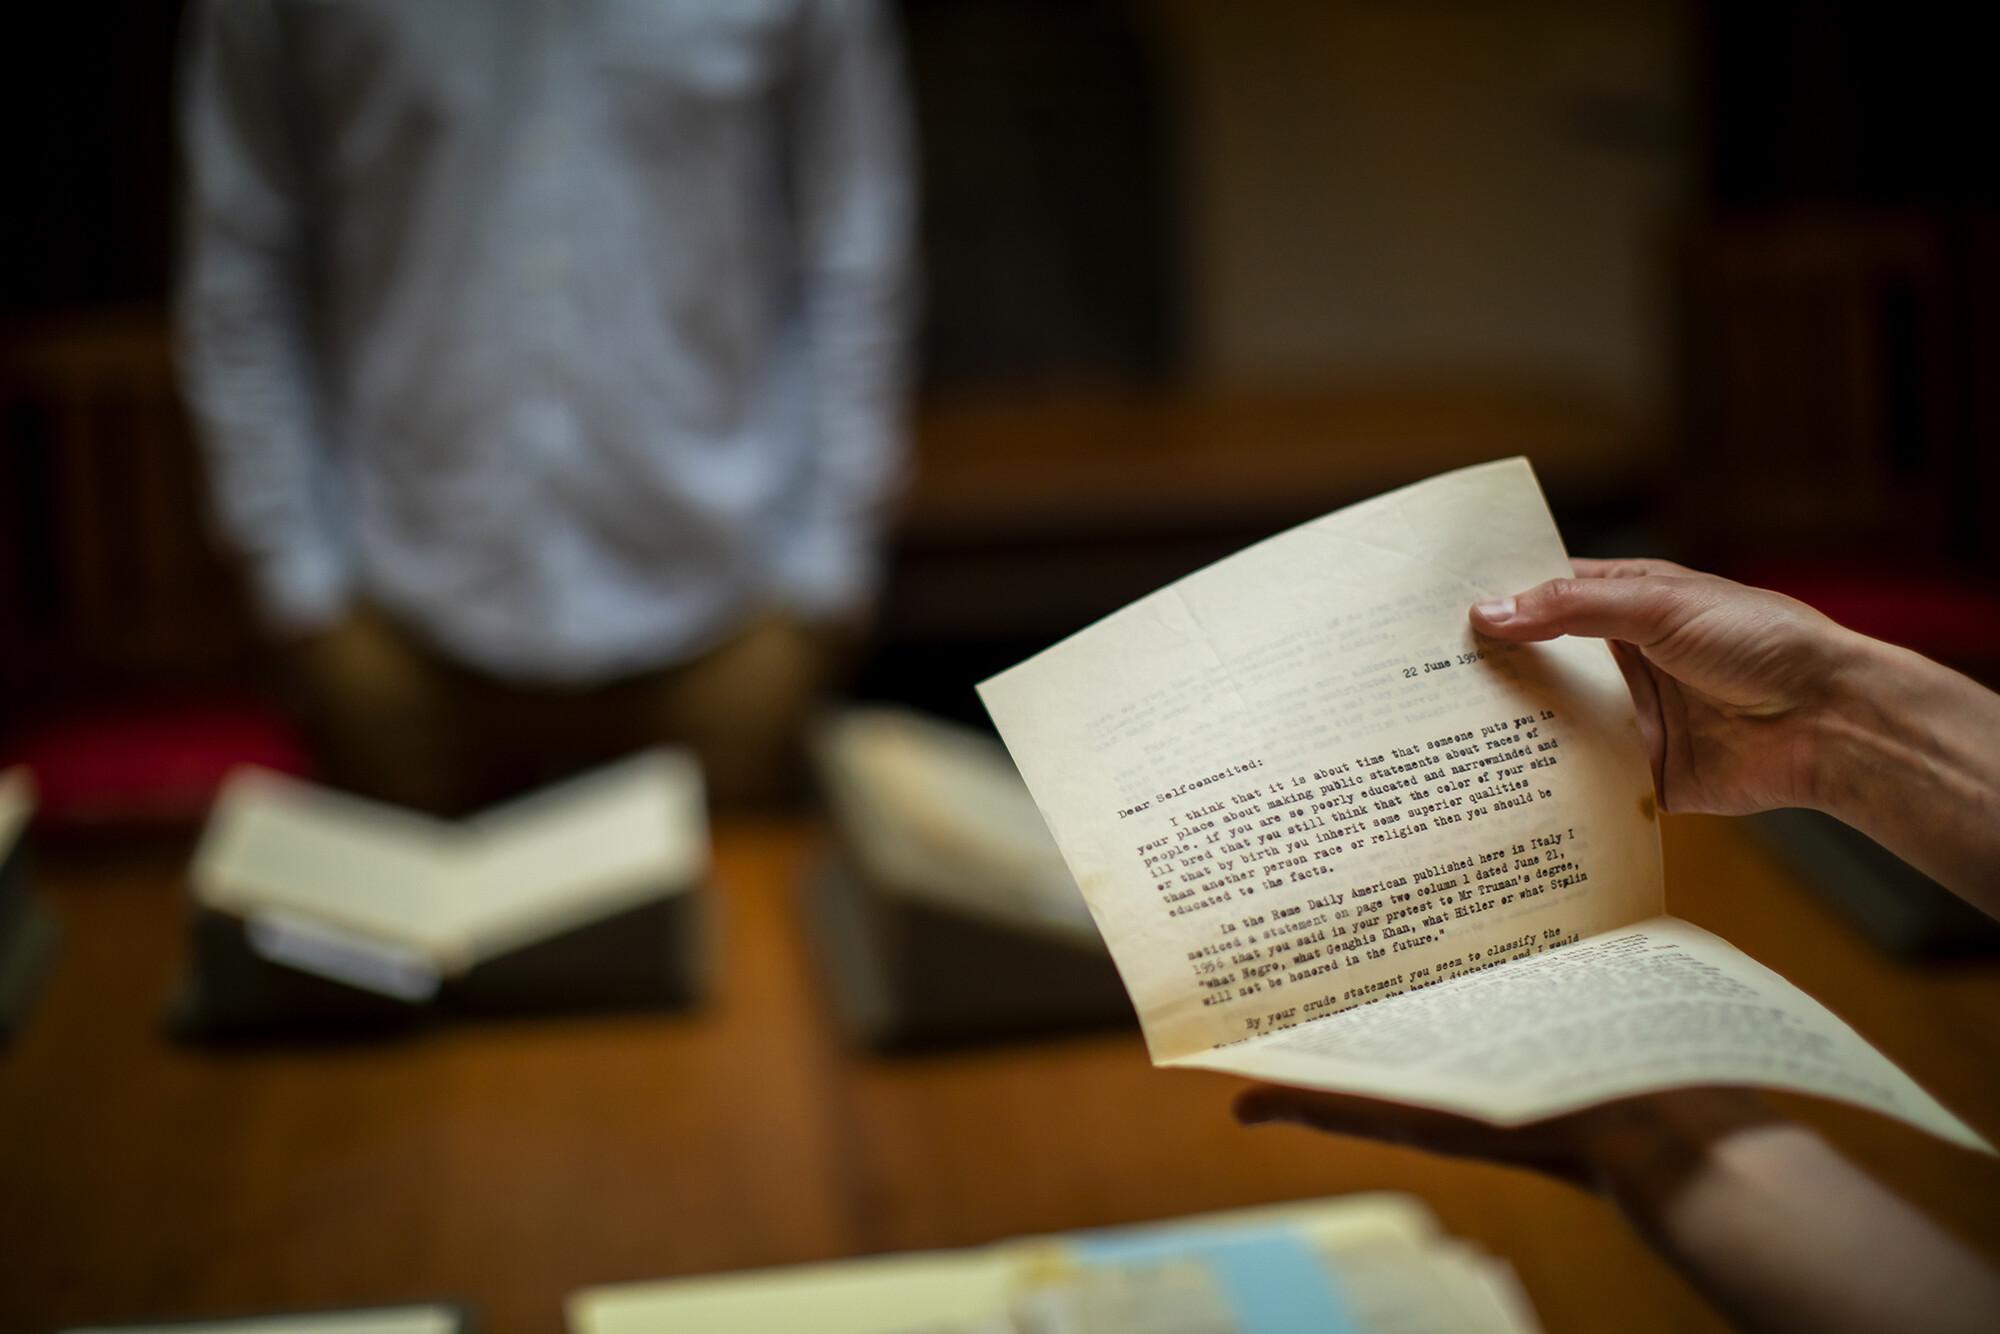 Typed letter, many pages thick, being held by two hands. A blurred figured standing in front of a book is in the background.